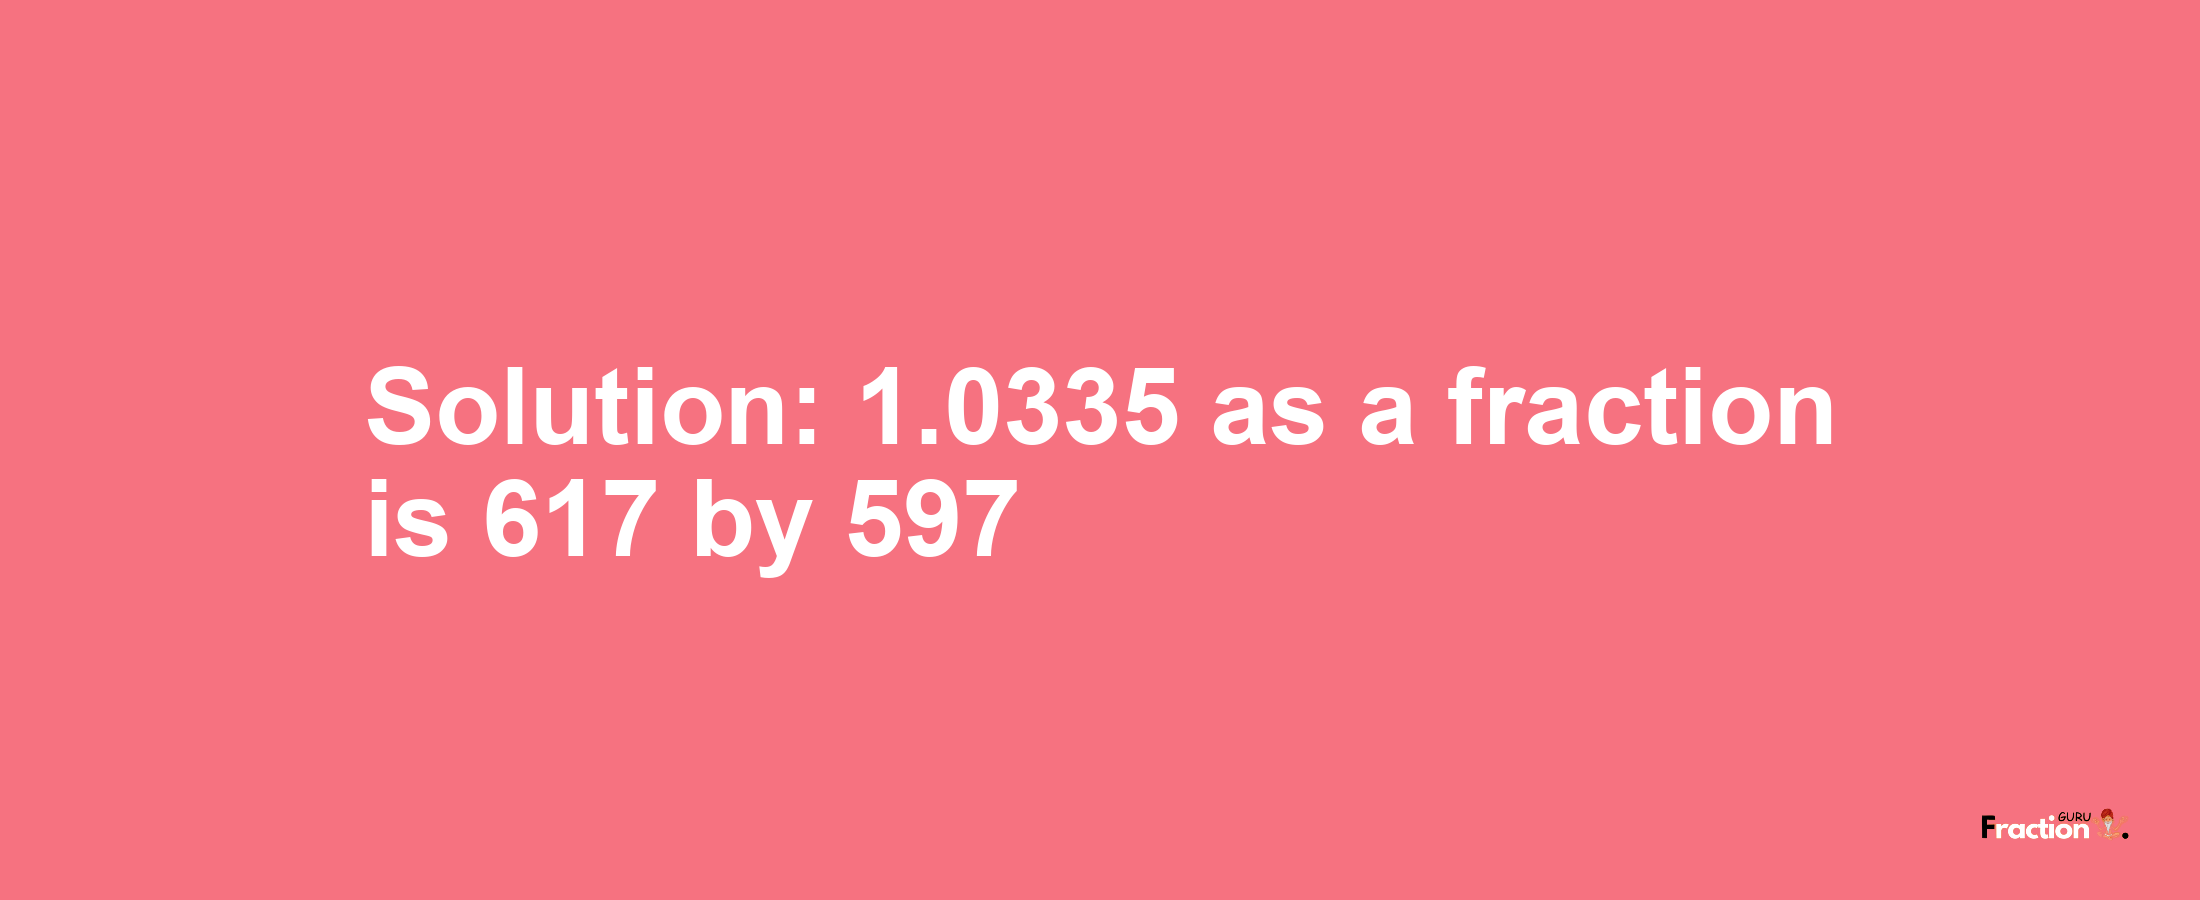 Solution:1.0335 as a fraction is 617/597